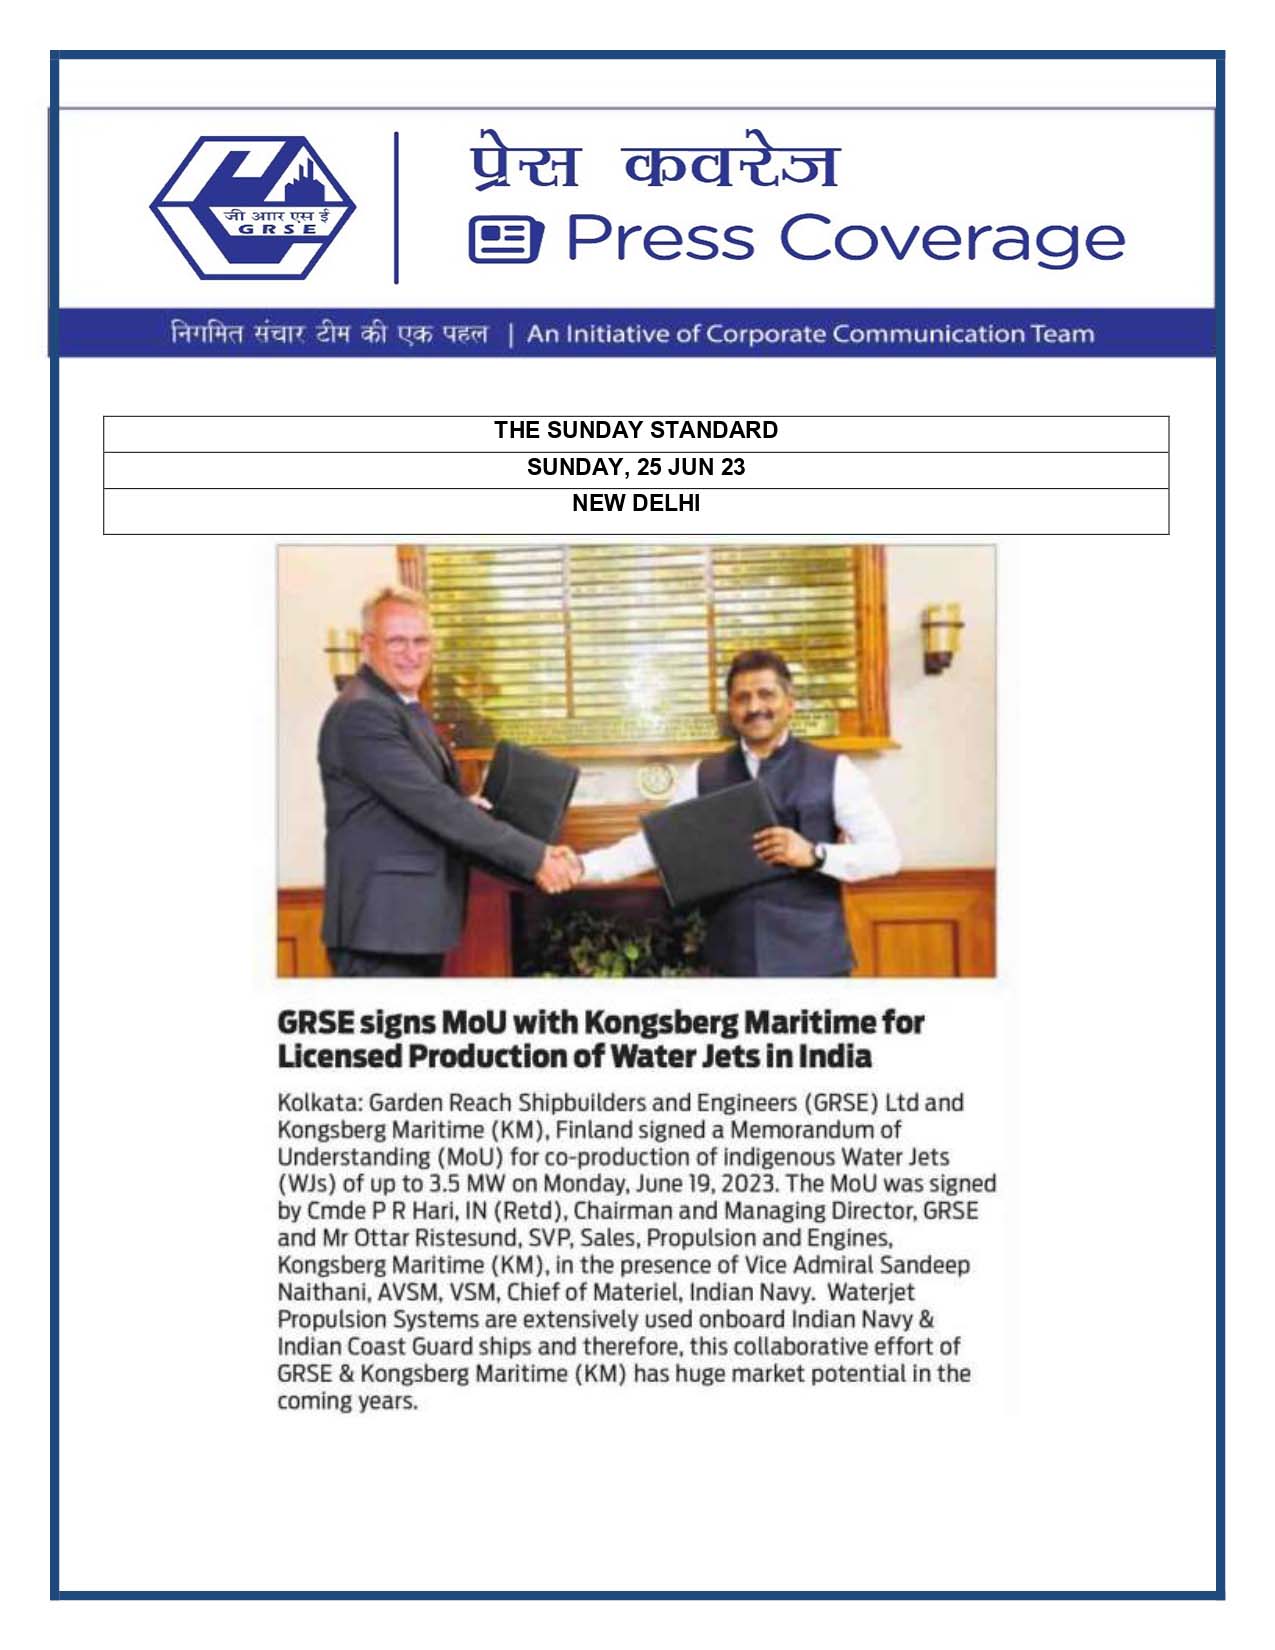 GRSE signs MoU with Kongsberg Maritime for Licensed Production of Water Jets in India